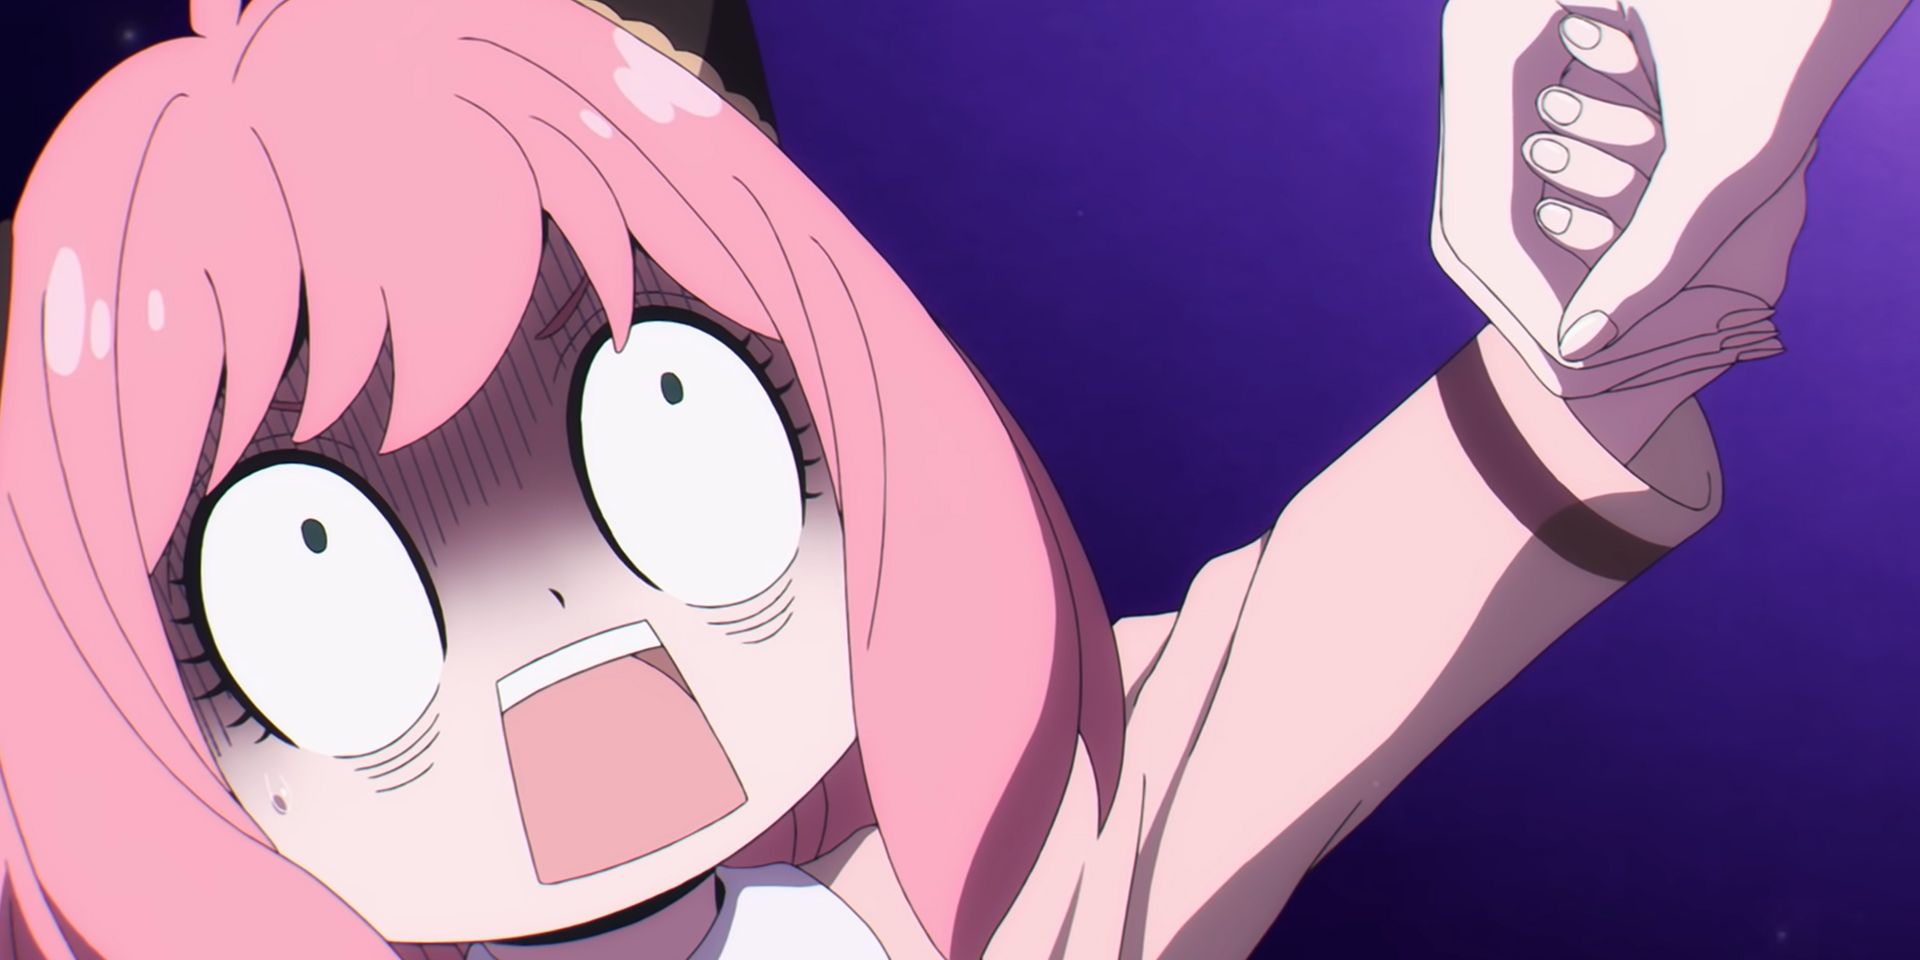 10 Anime Characters With The Funniest Facial Expressions